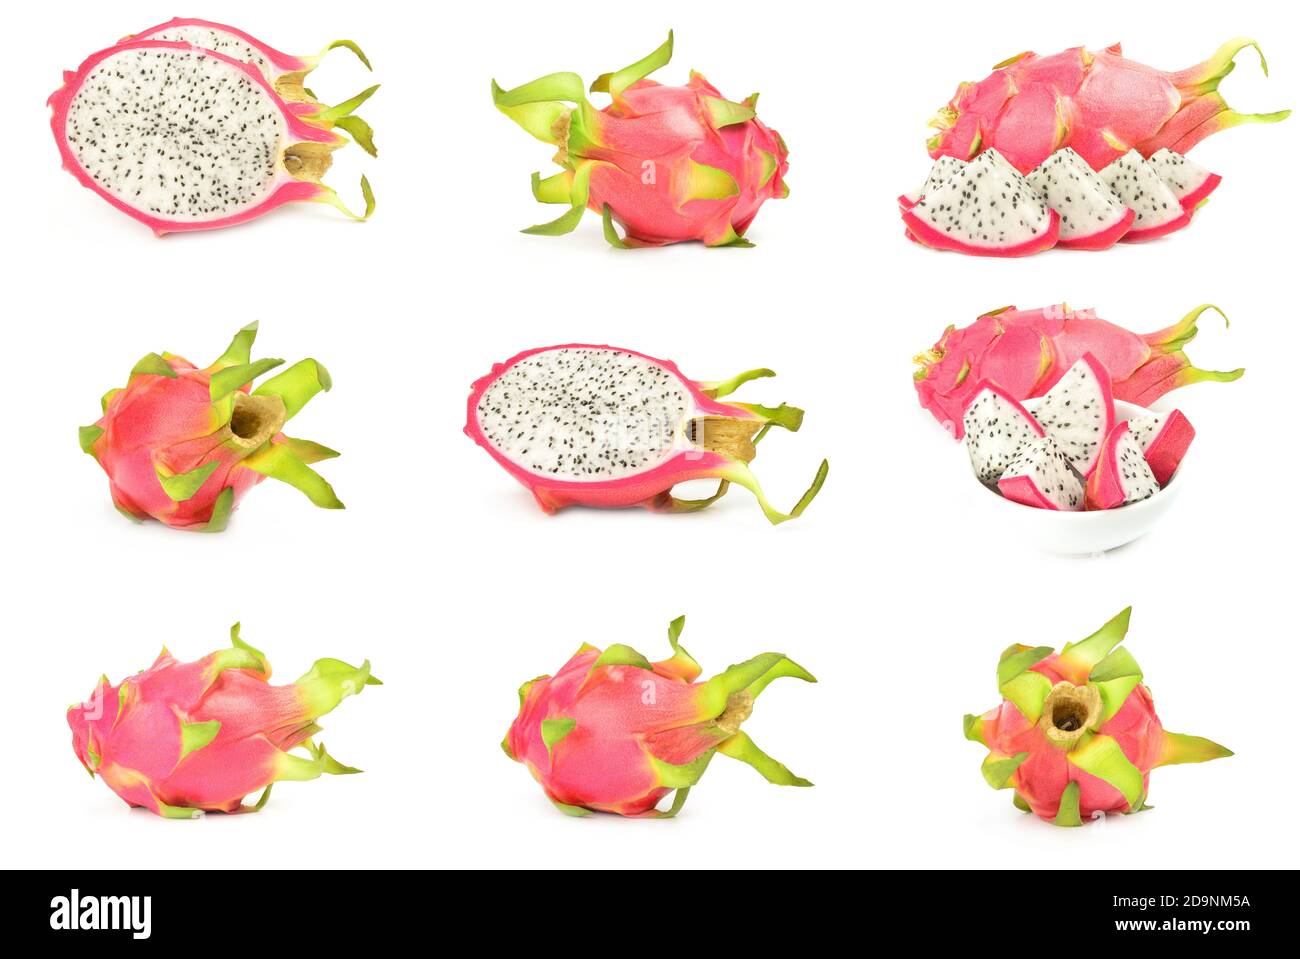 Collection of pitahaya isolated over a white background Stock Photo